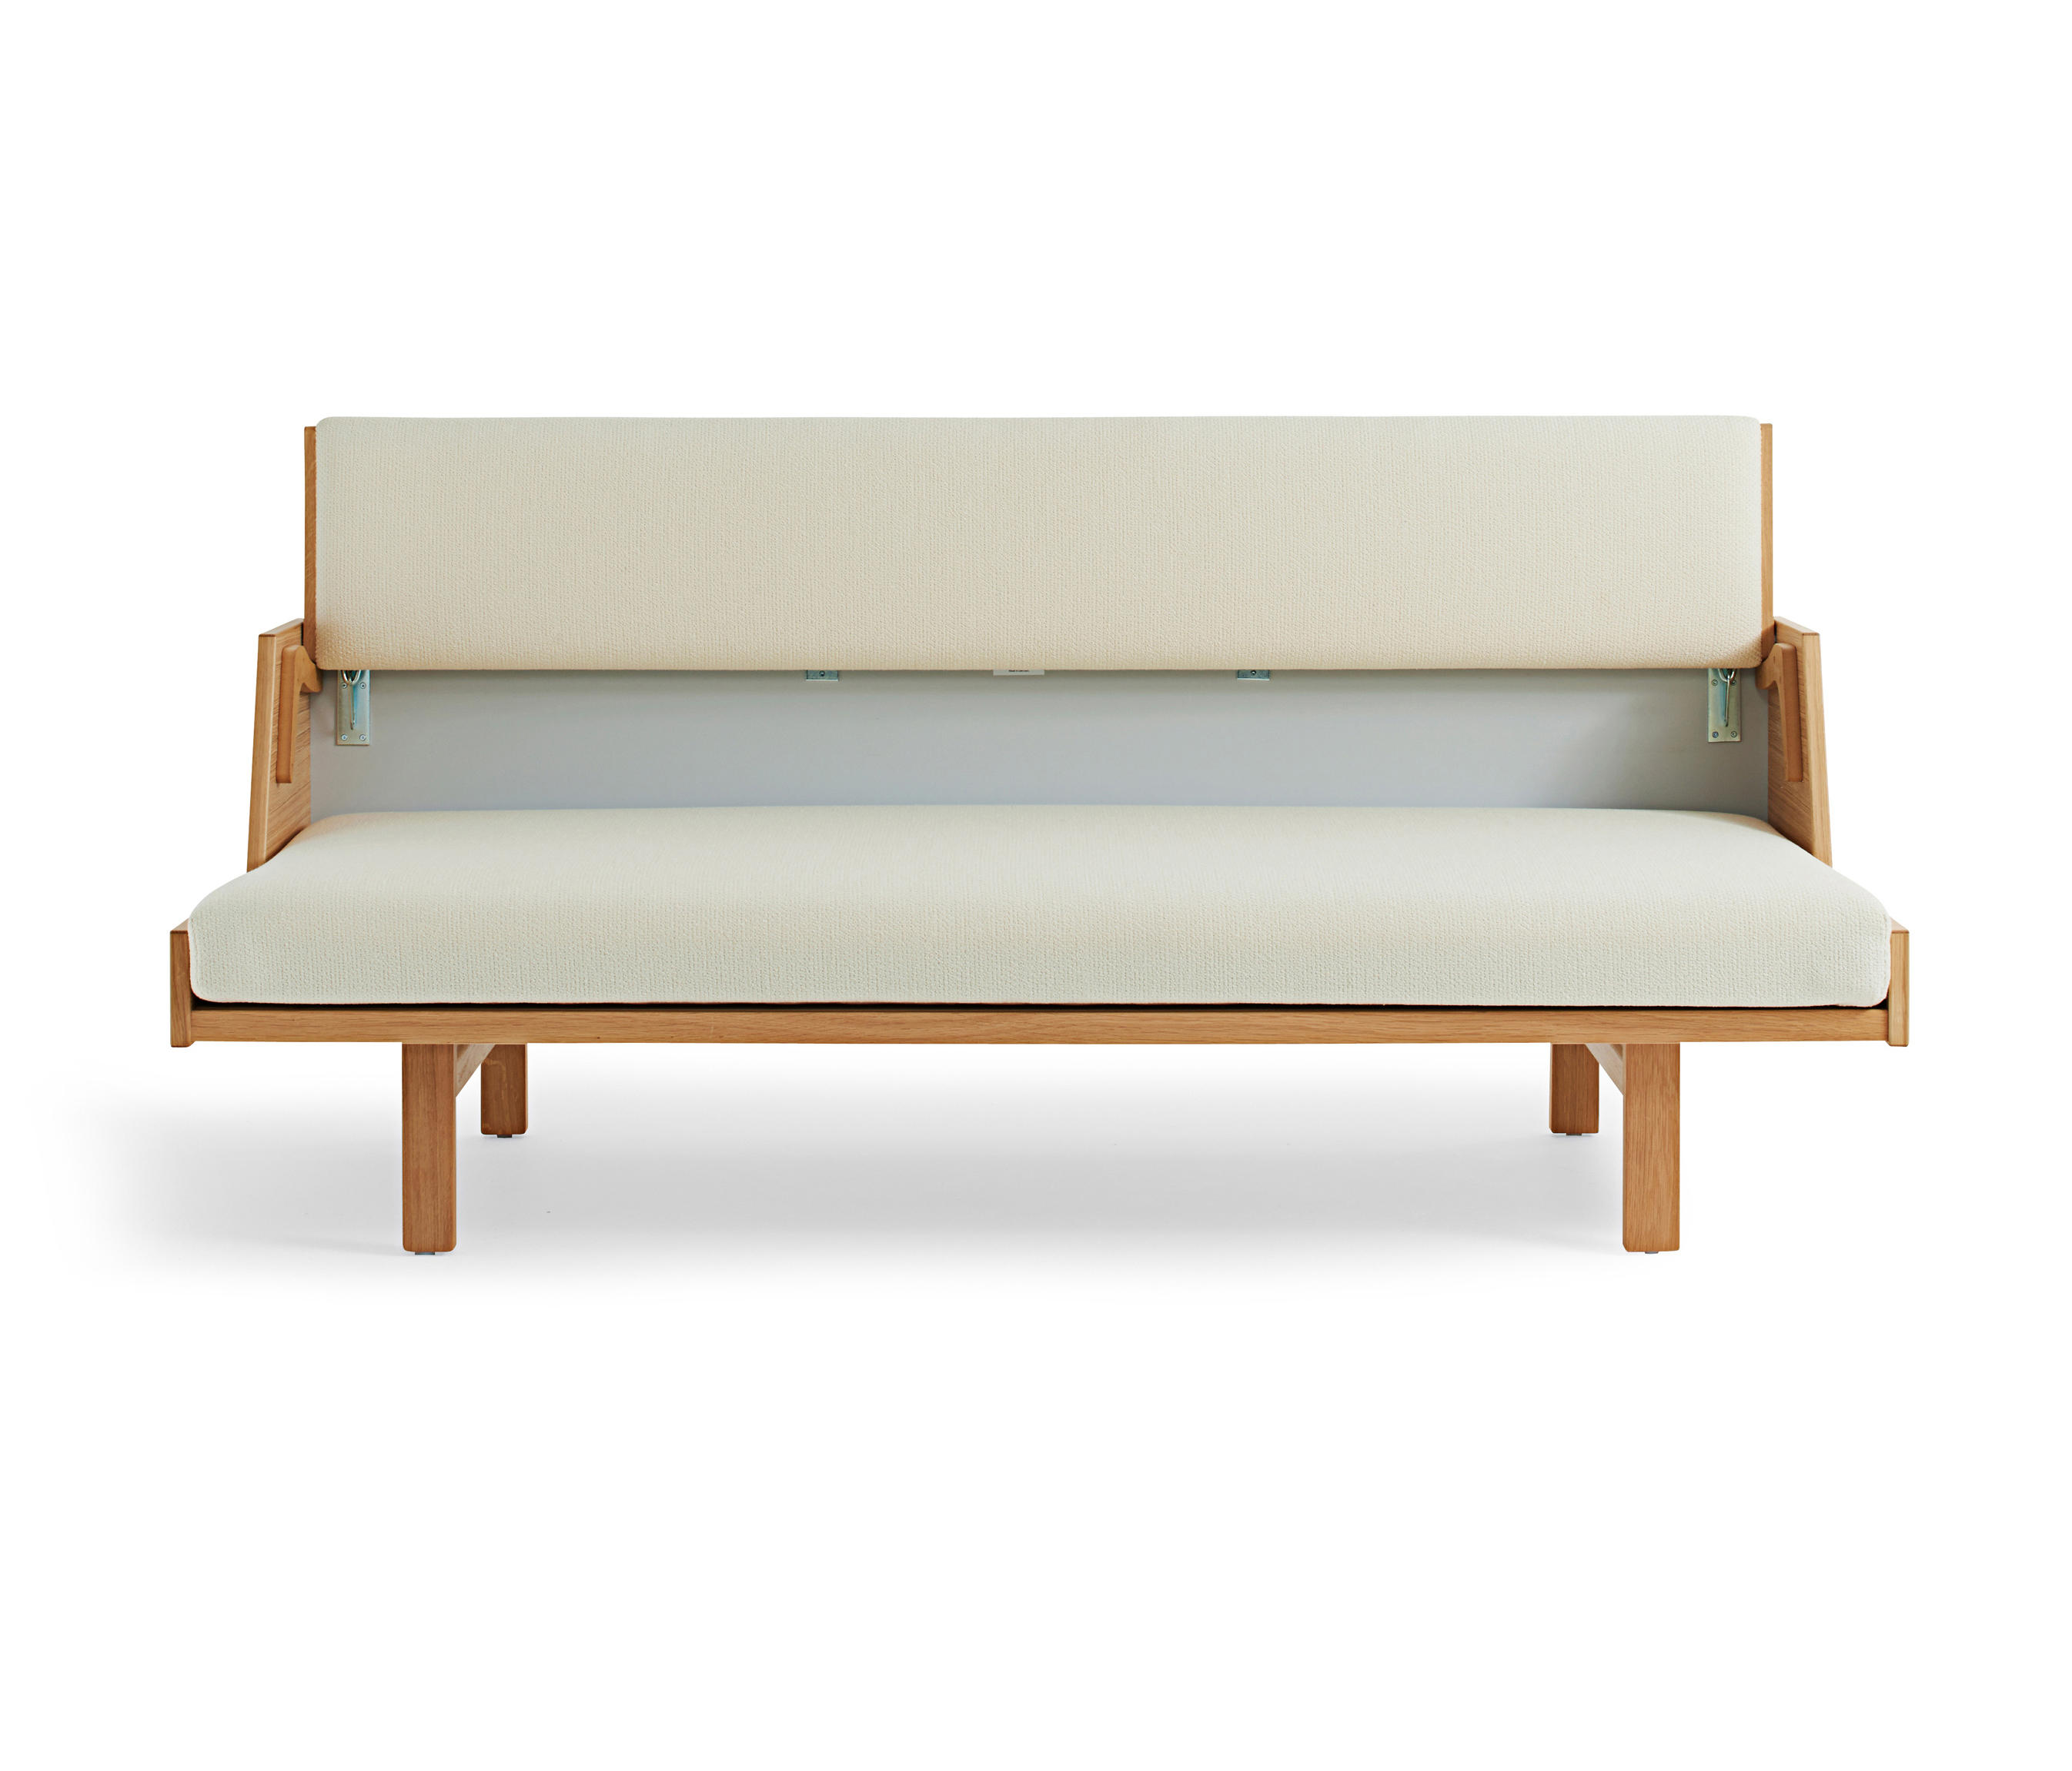 GE 259 DAY BED Sofas from Getama Danmark Architonic